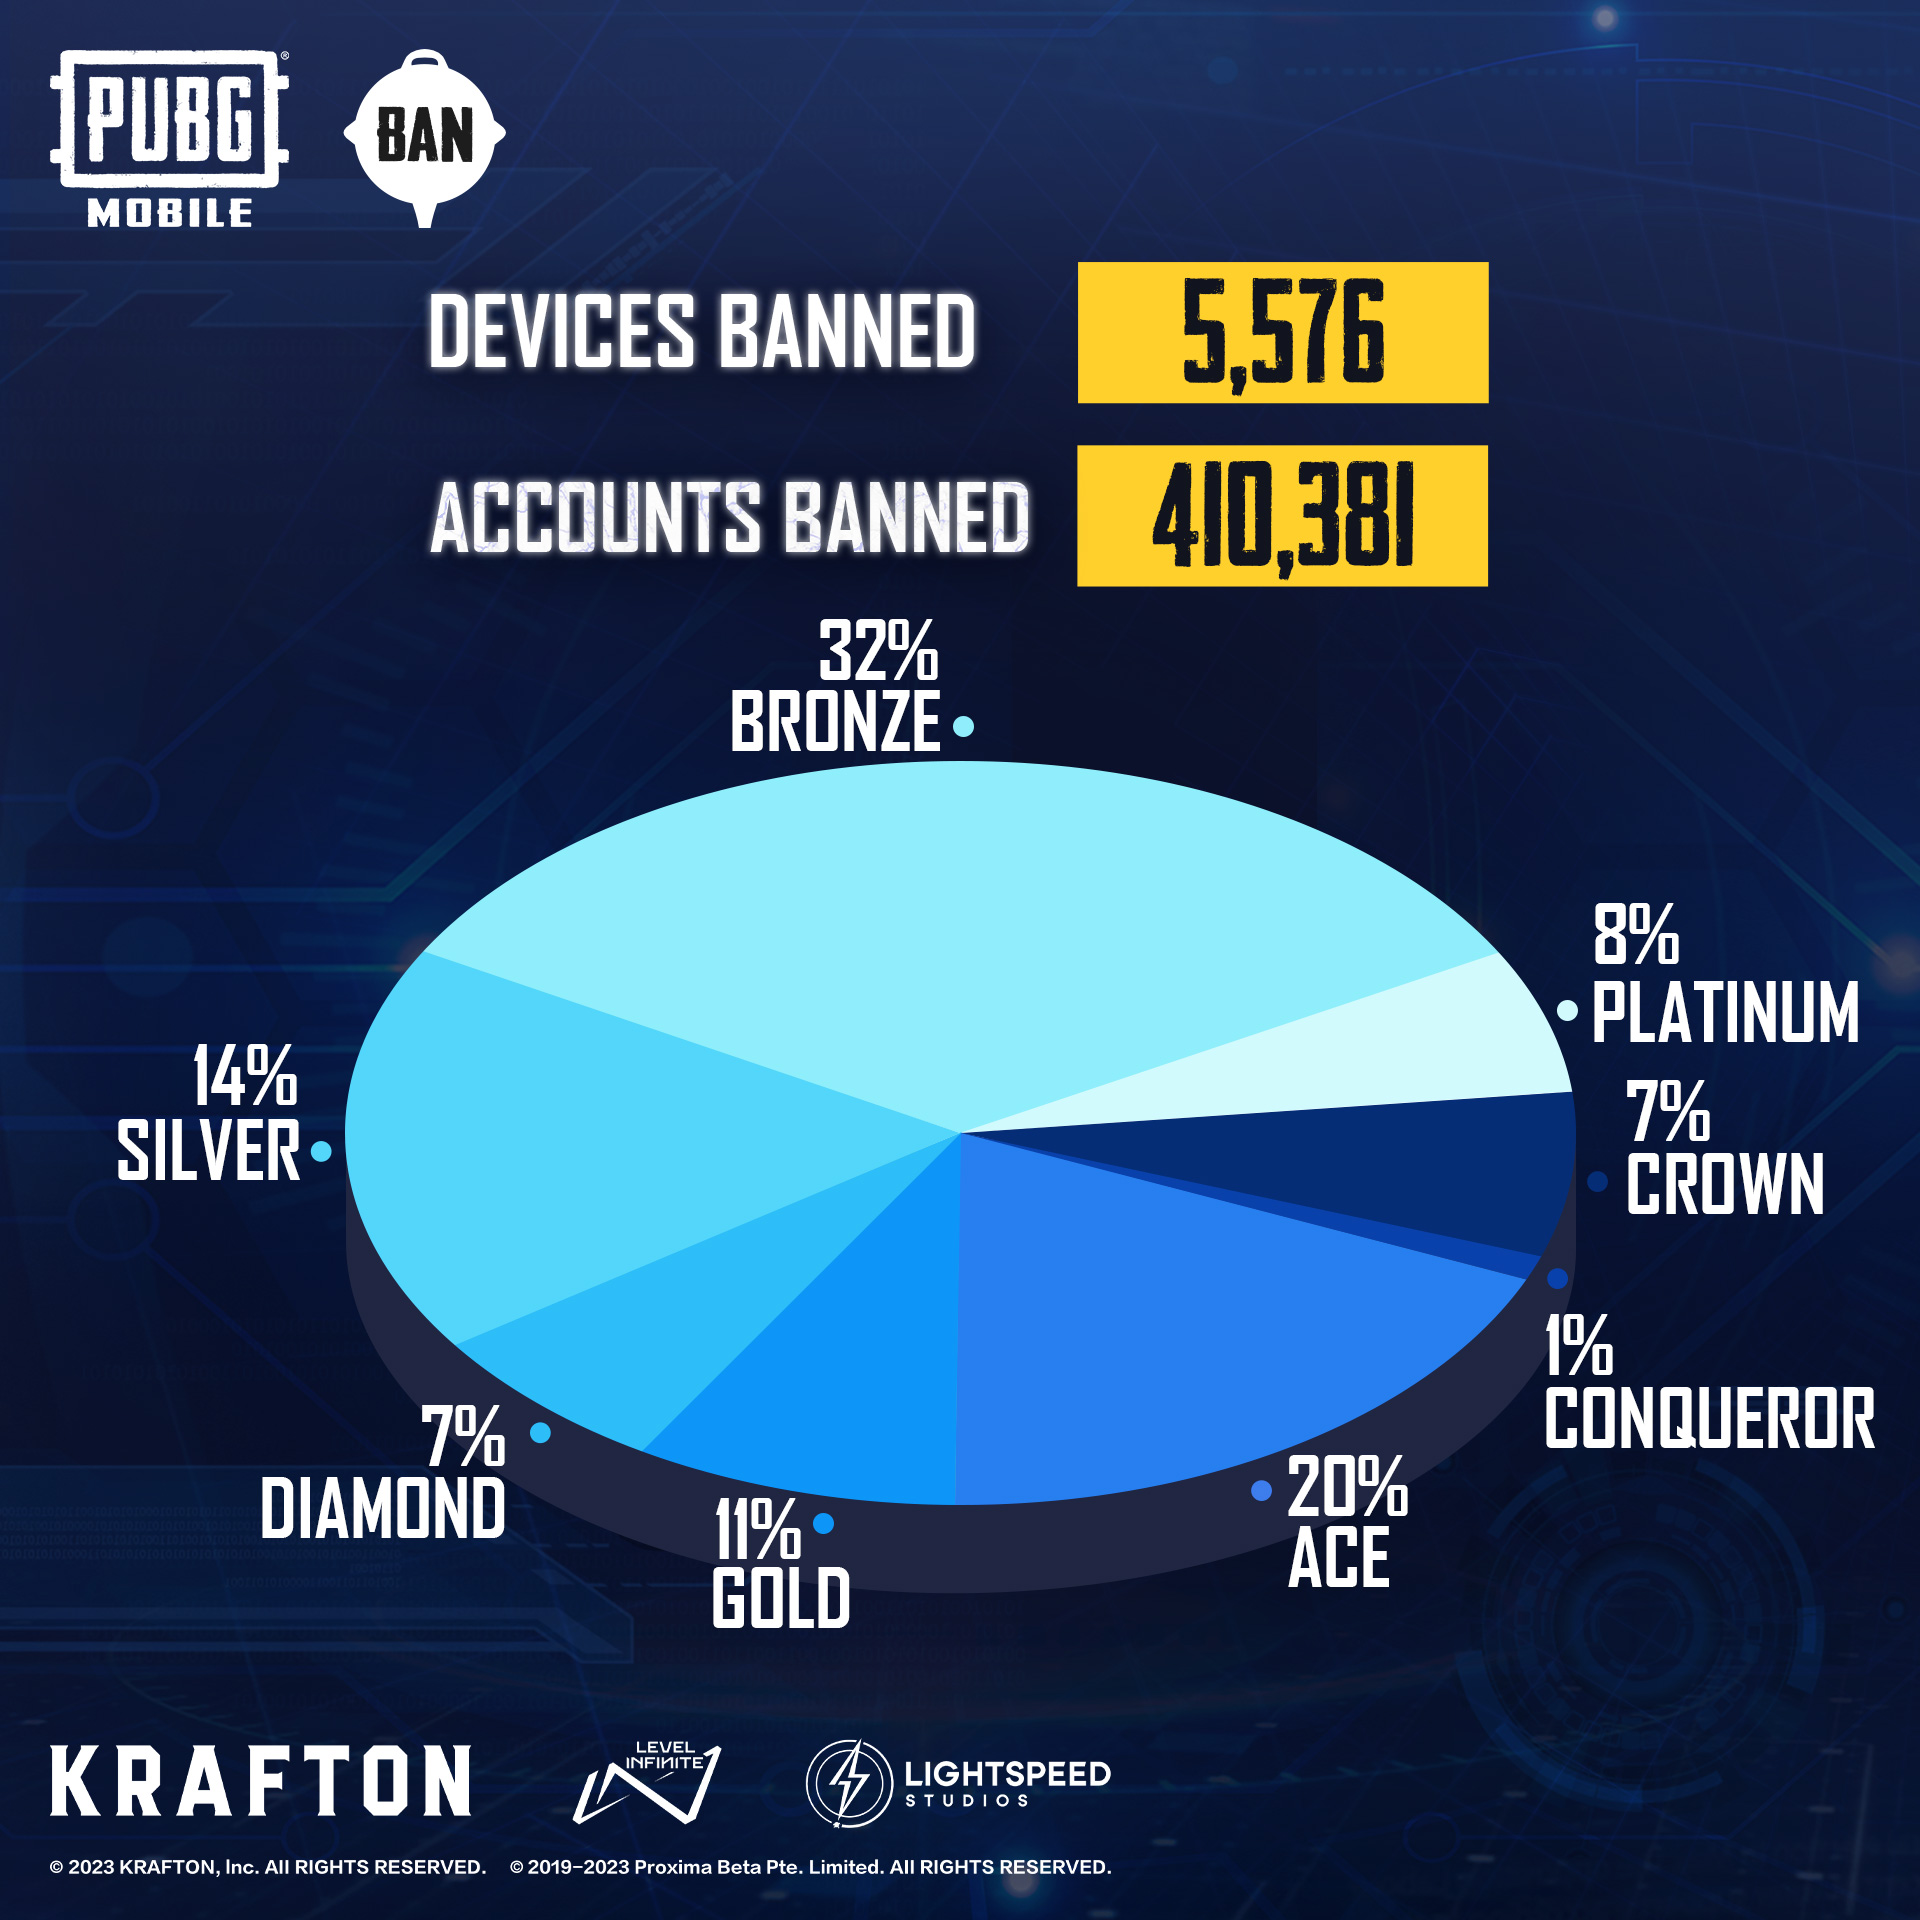 PUBG Mobile Anti-cheat Report Week 6: Level Infinite issues suspension for 410,381 accounts and 5,576 devices, Check details